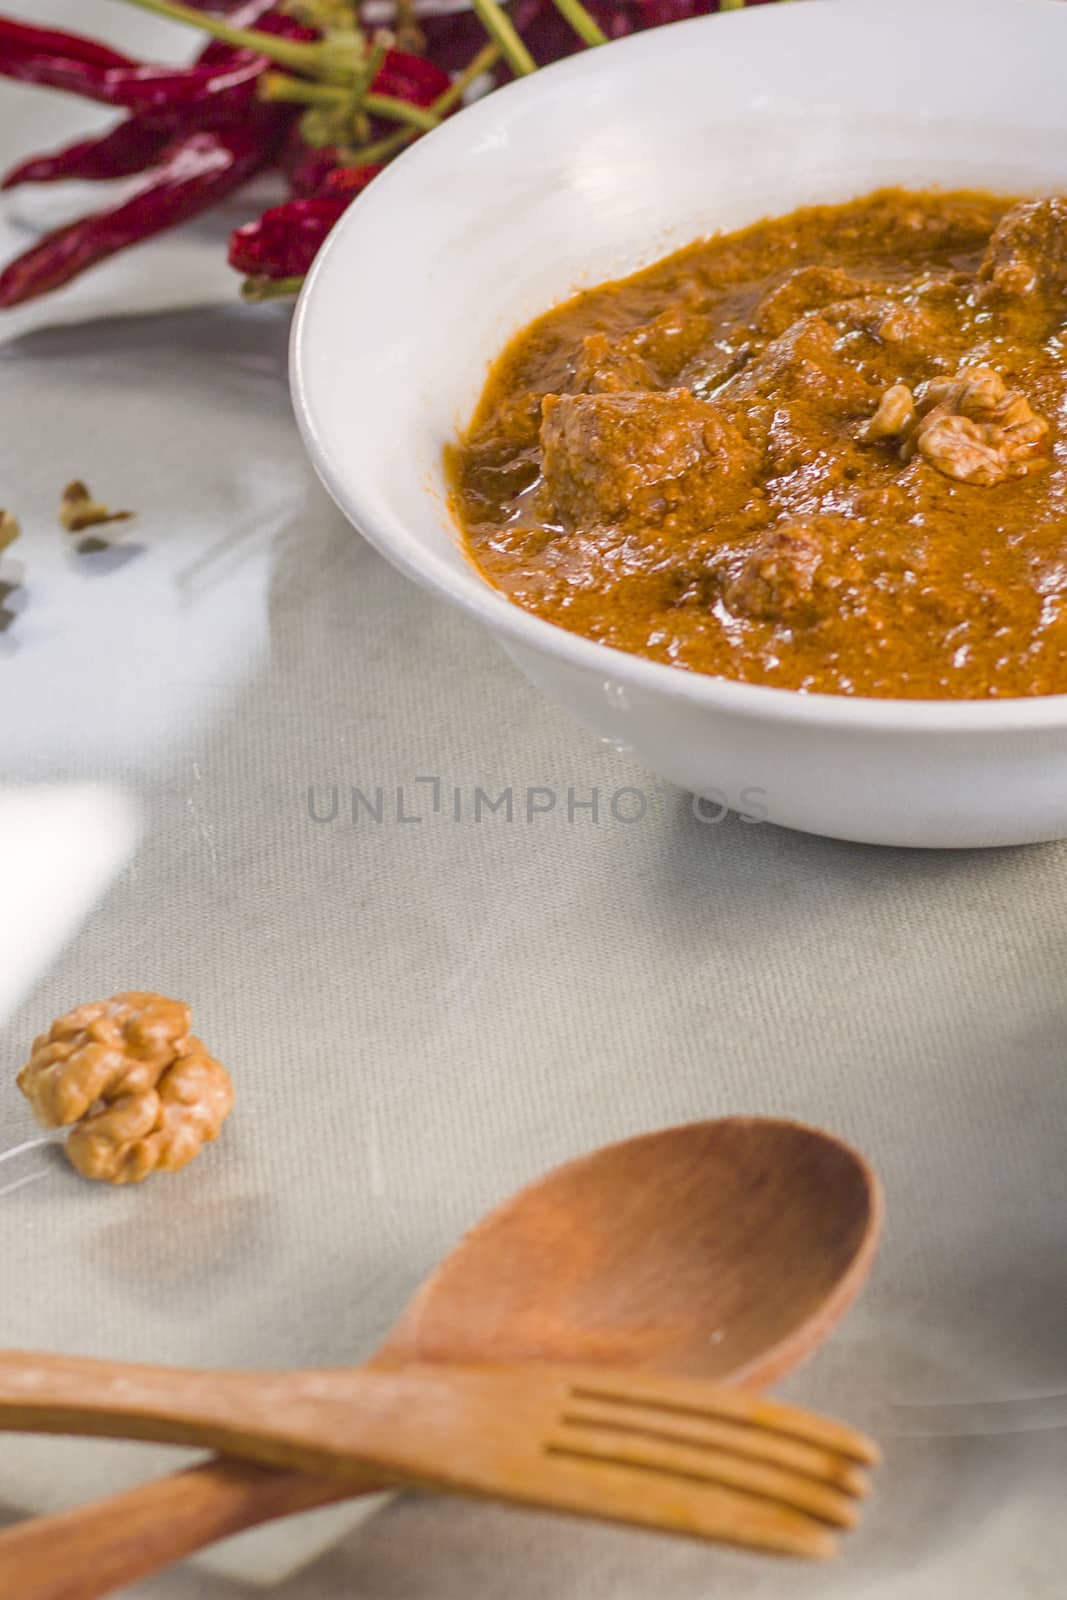 Georgian traditional food soup Kharcho or walnuts souse with beef meal, dry red pepper, tomatoes and other ingredients. Withe wine and wooden spoon. by Taidundua